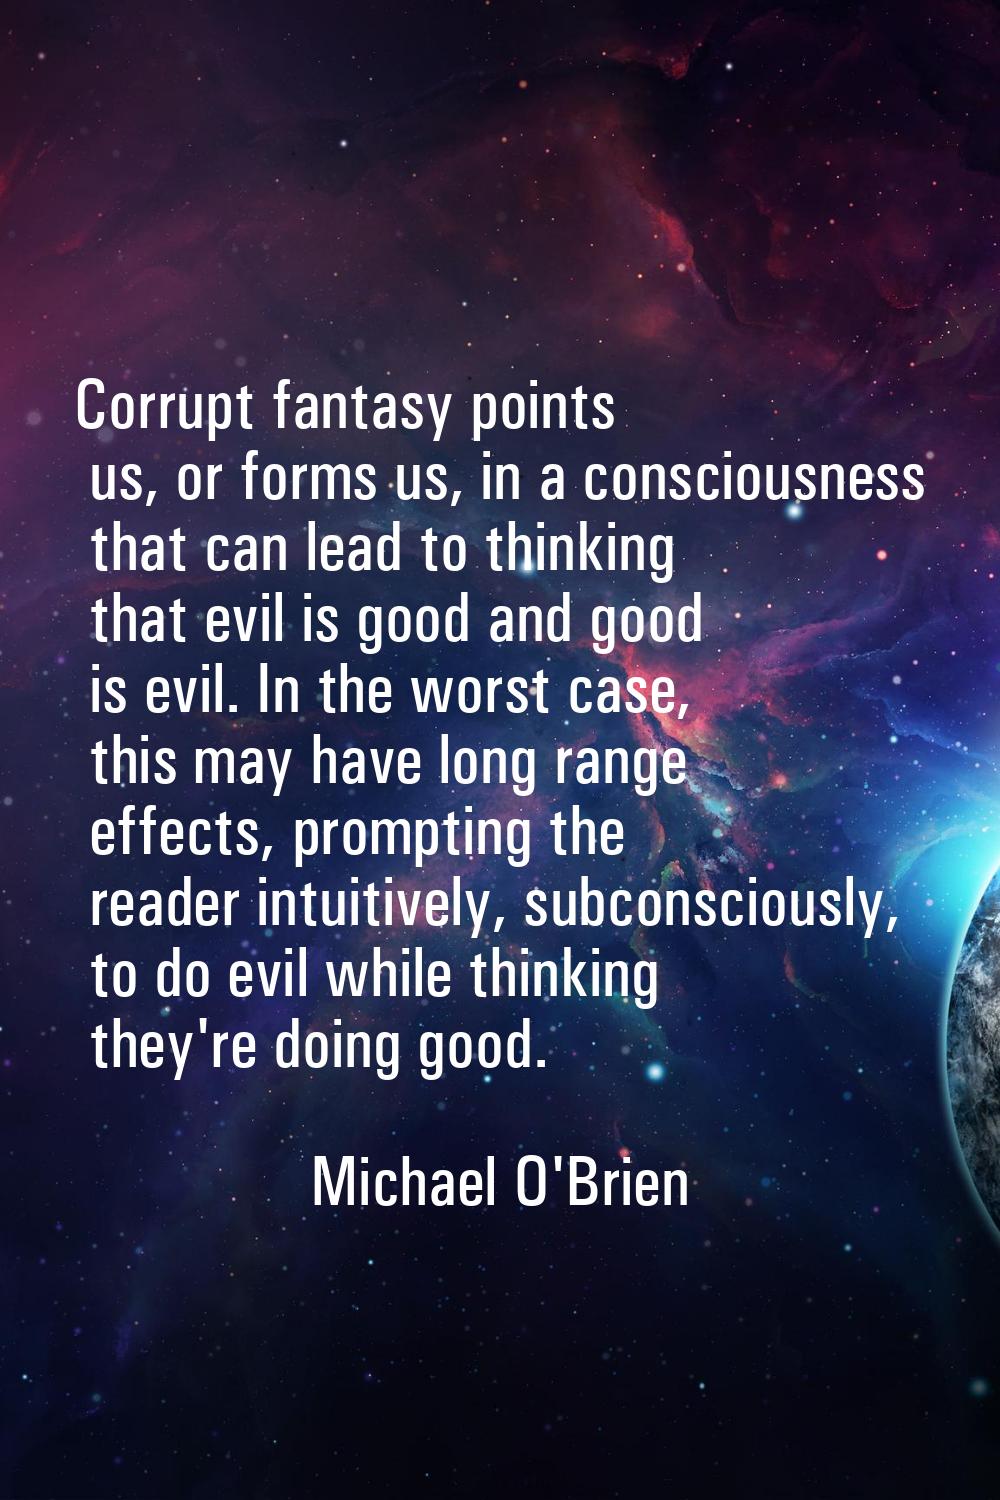 Corrupt fantasy points us, or forms us, in a consciousness that can lead to thinking that evil is g